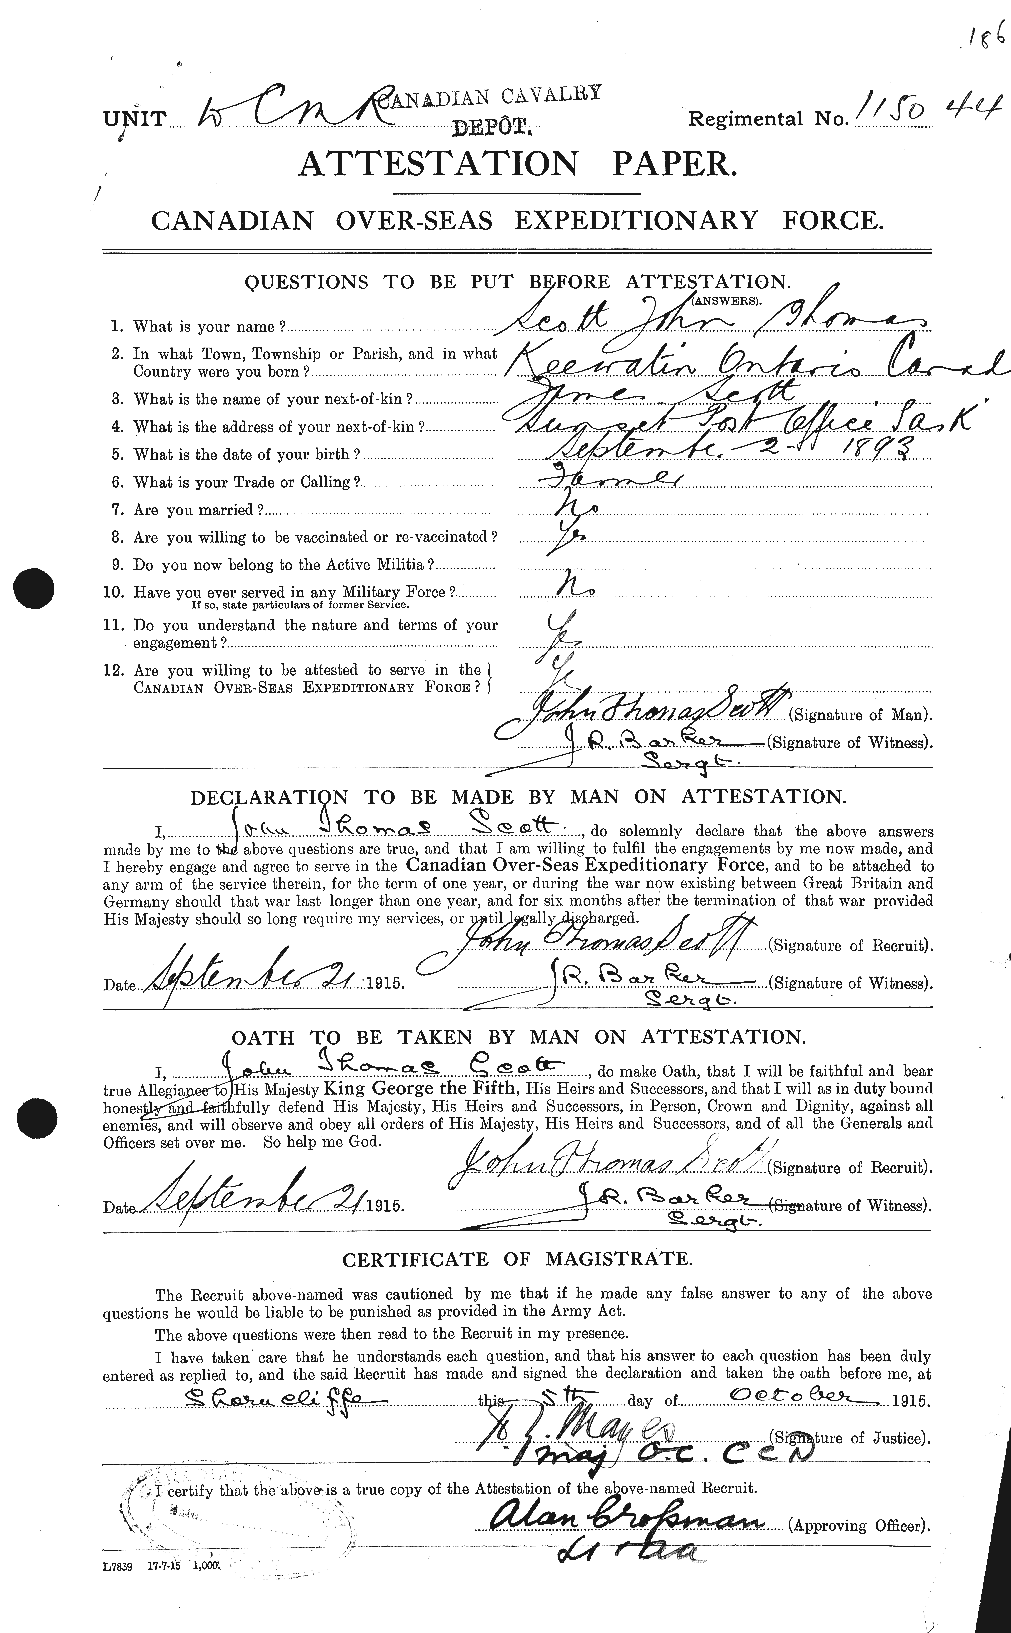 Personnel Records of the First World War - CEF 084419a